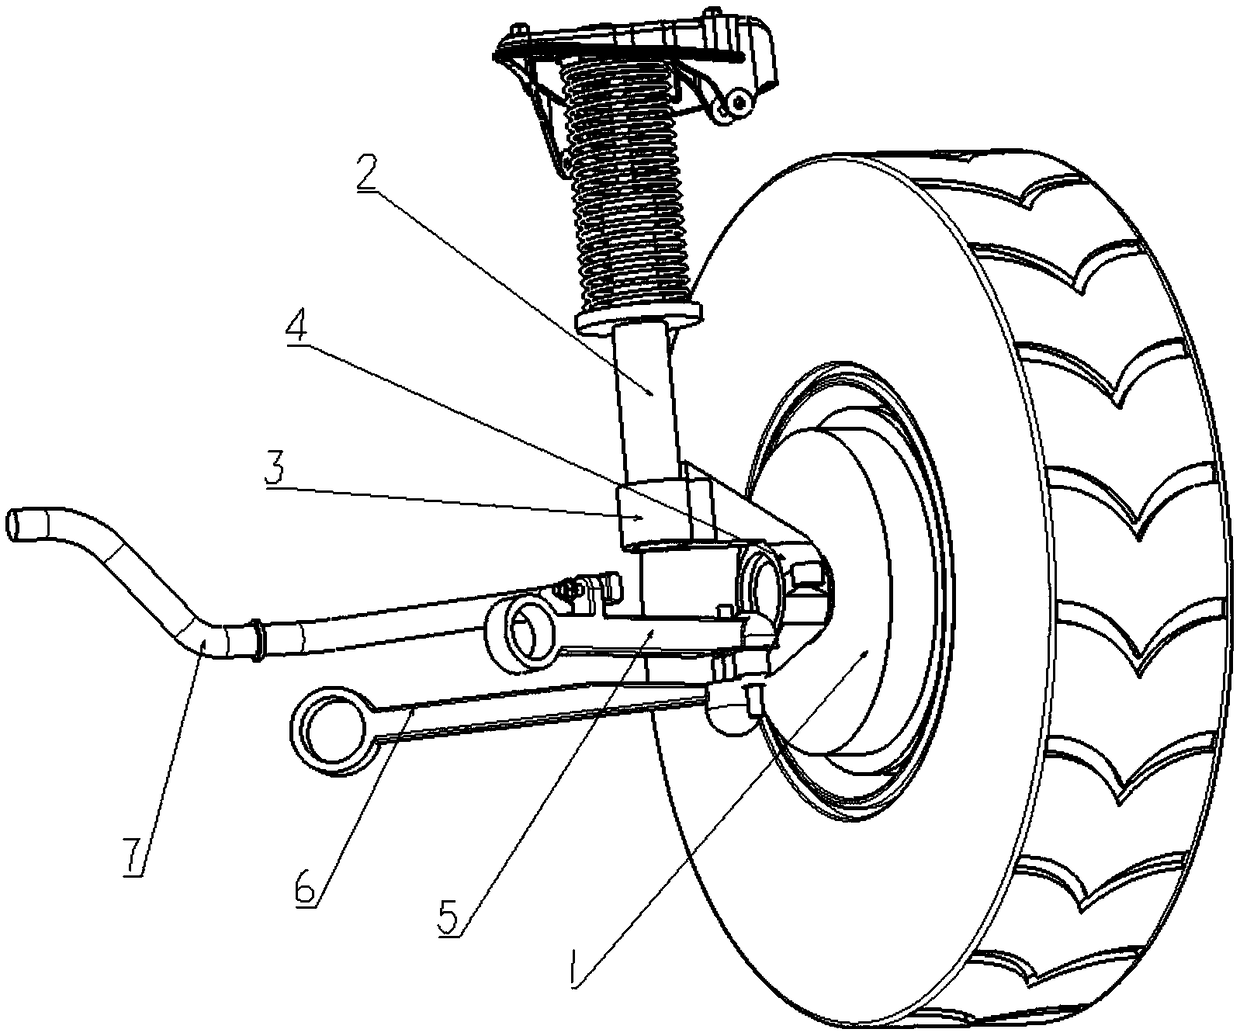 Suspension angle assembly of electric vehicle driven by hub motor